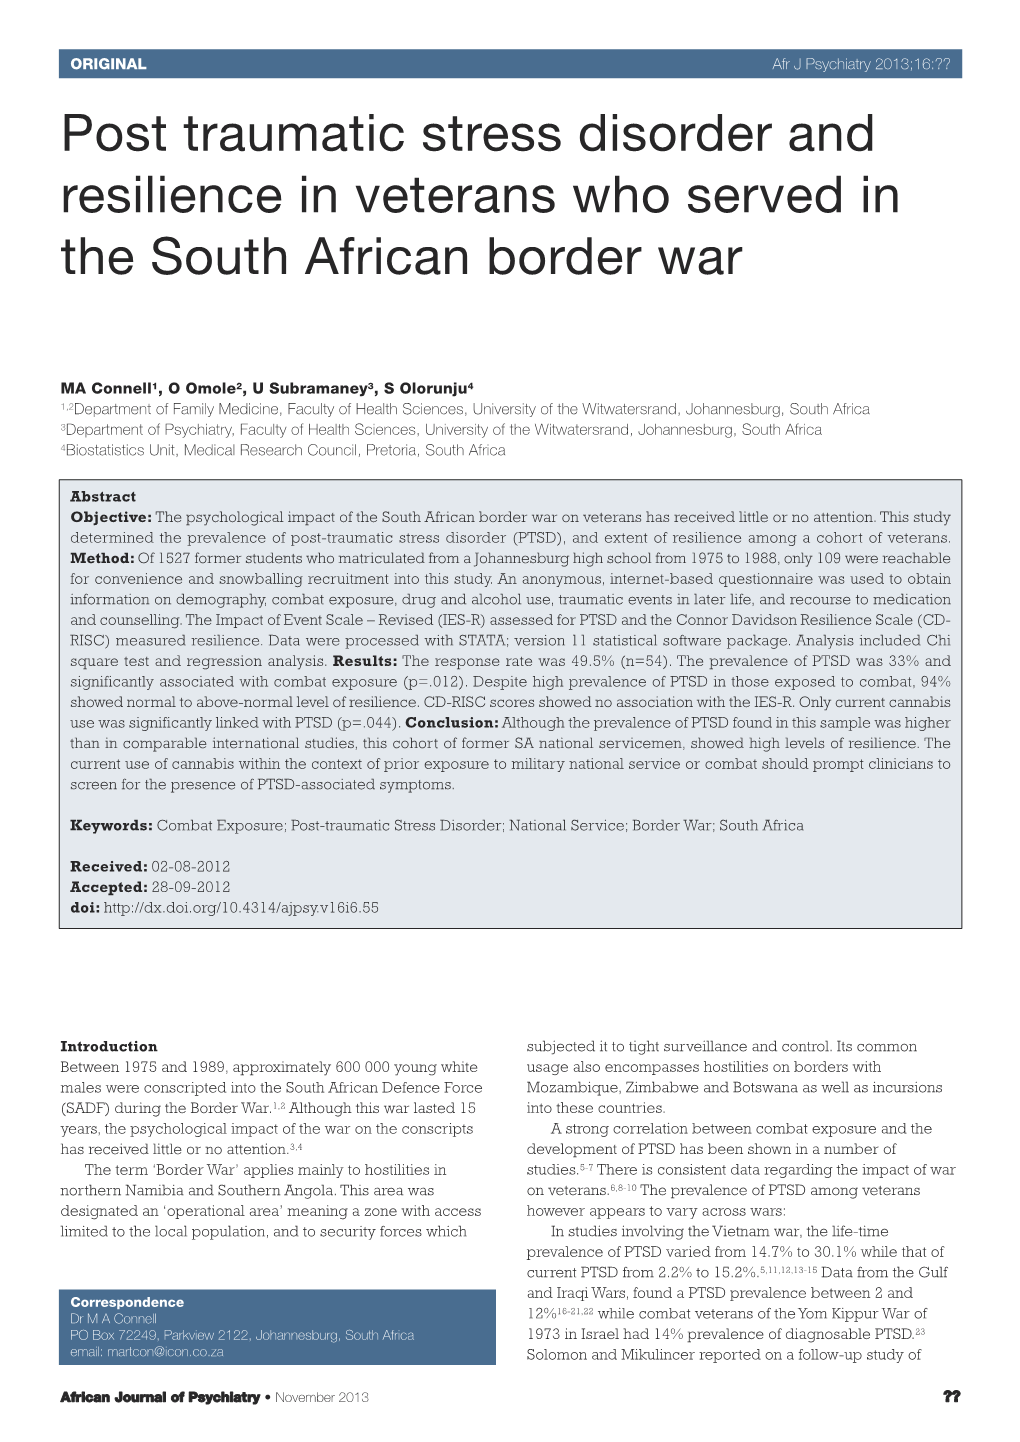 Post Traumatic Stress Disorder and Resilience in Veterans Who Served in the South African Border War